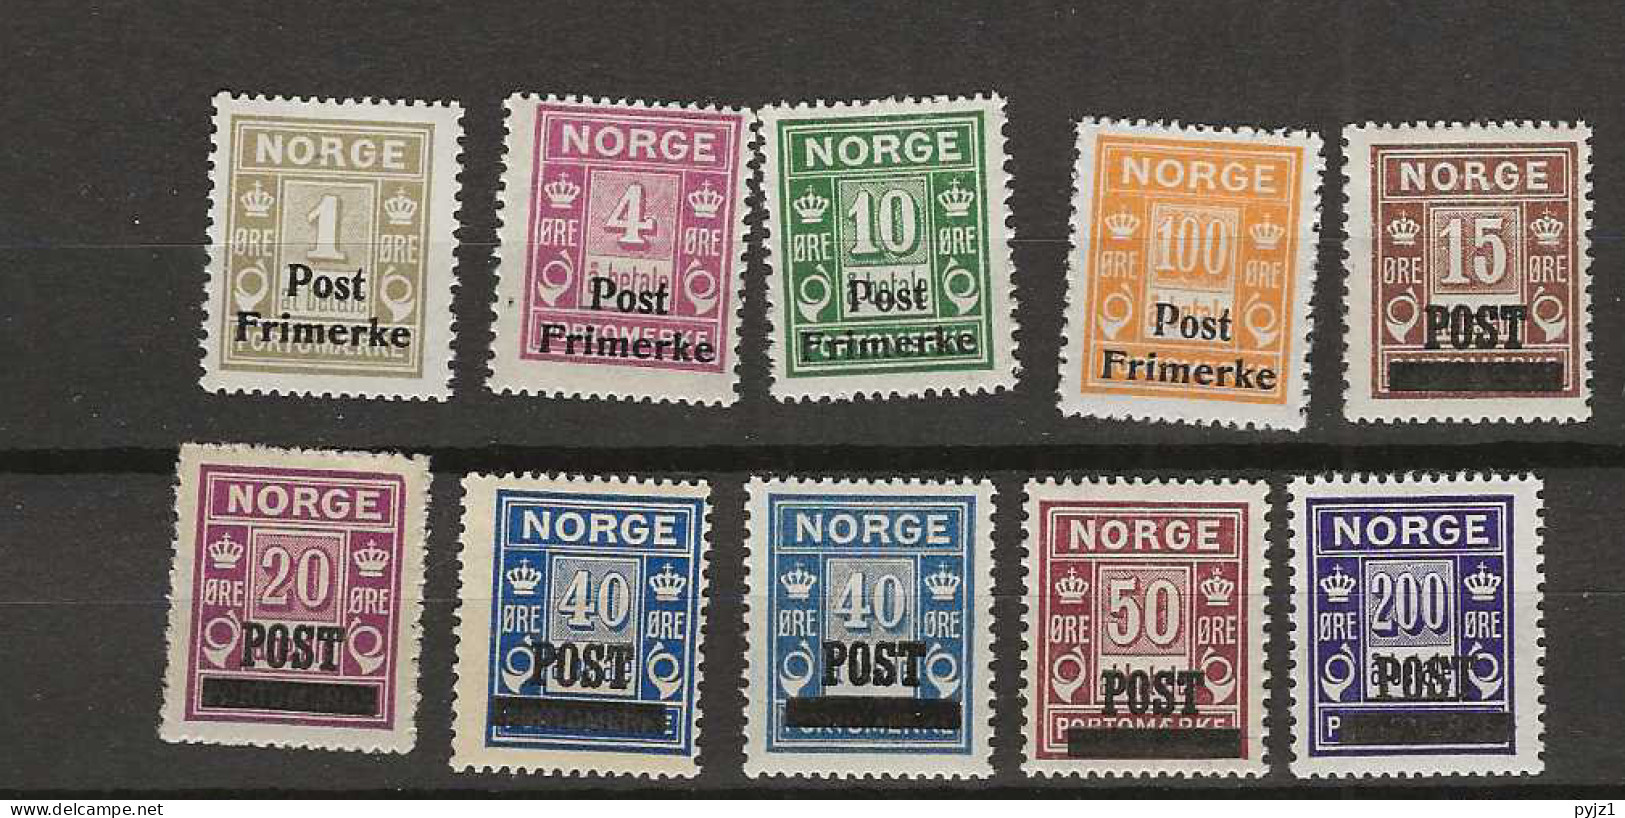 1929 MNH Norway Mi 141-149 (20 Ore Is MH/*) Including Both Shades Of 40 Ore - Nuevos